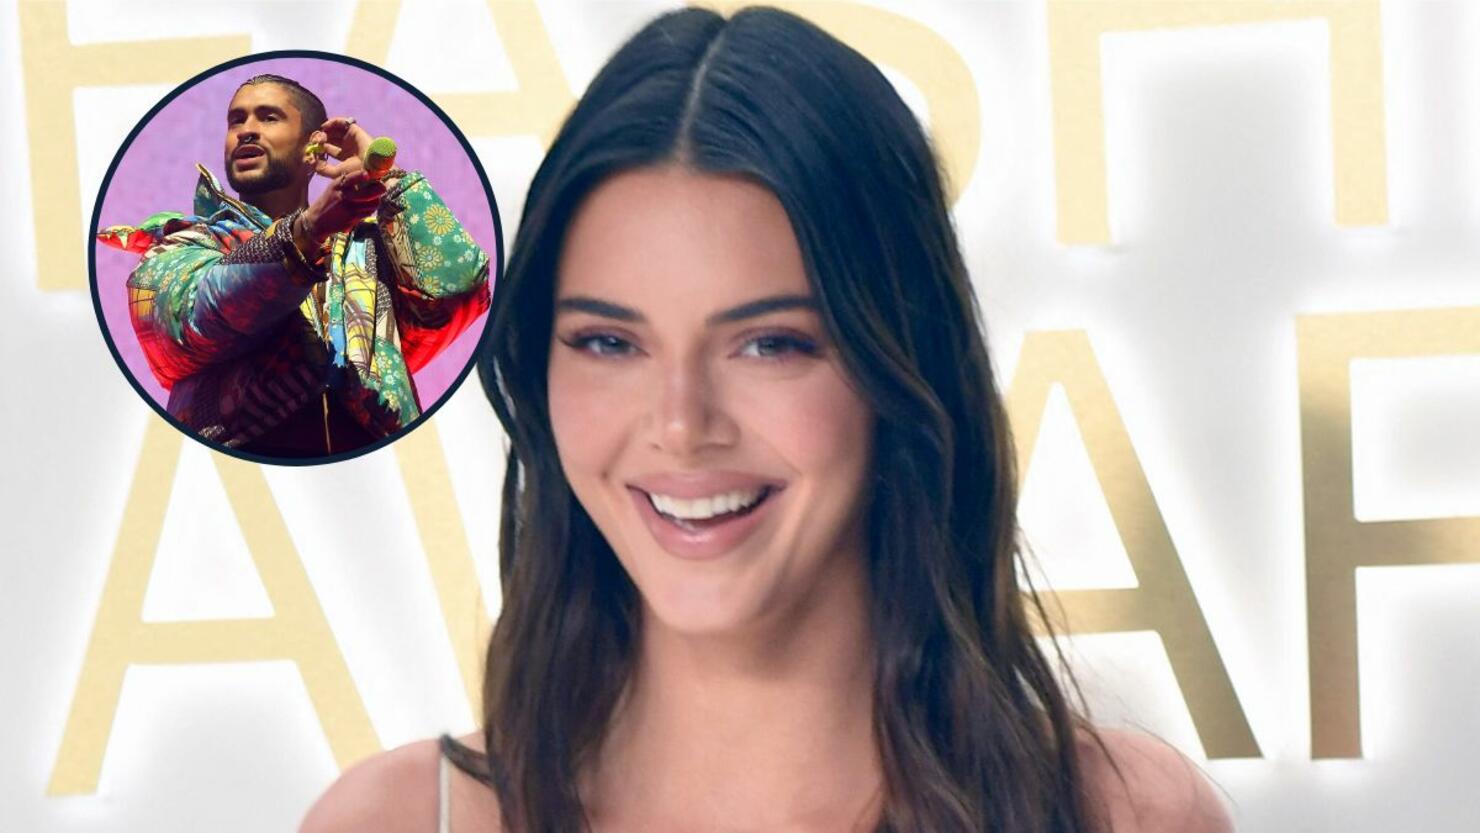 Kendall Jenner going to the Latin Billboard's with Bad Bunny #kendalljenner  #badbunny #latinbillboards #comedy #relatable #realitytv